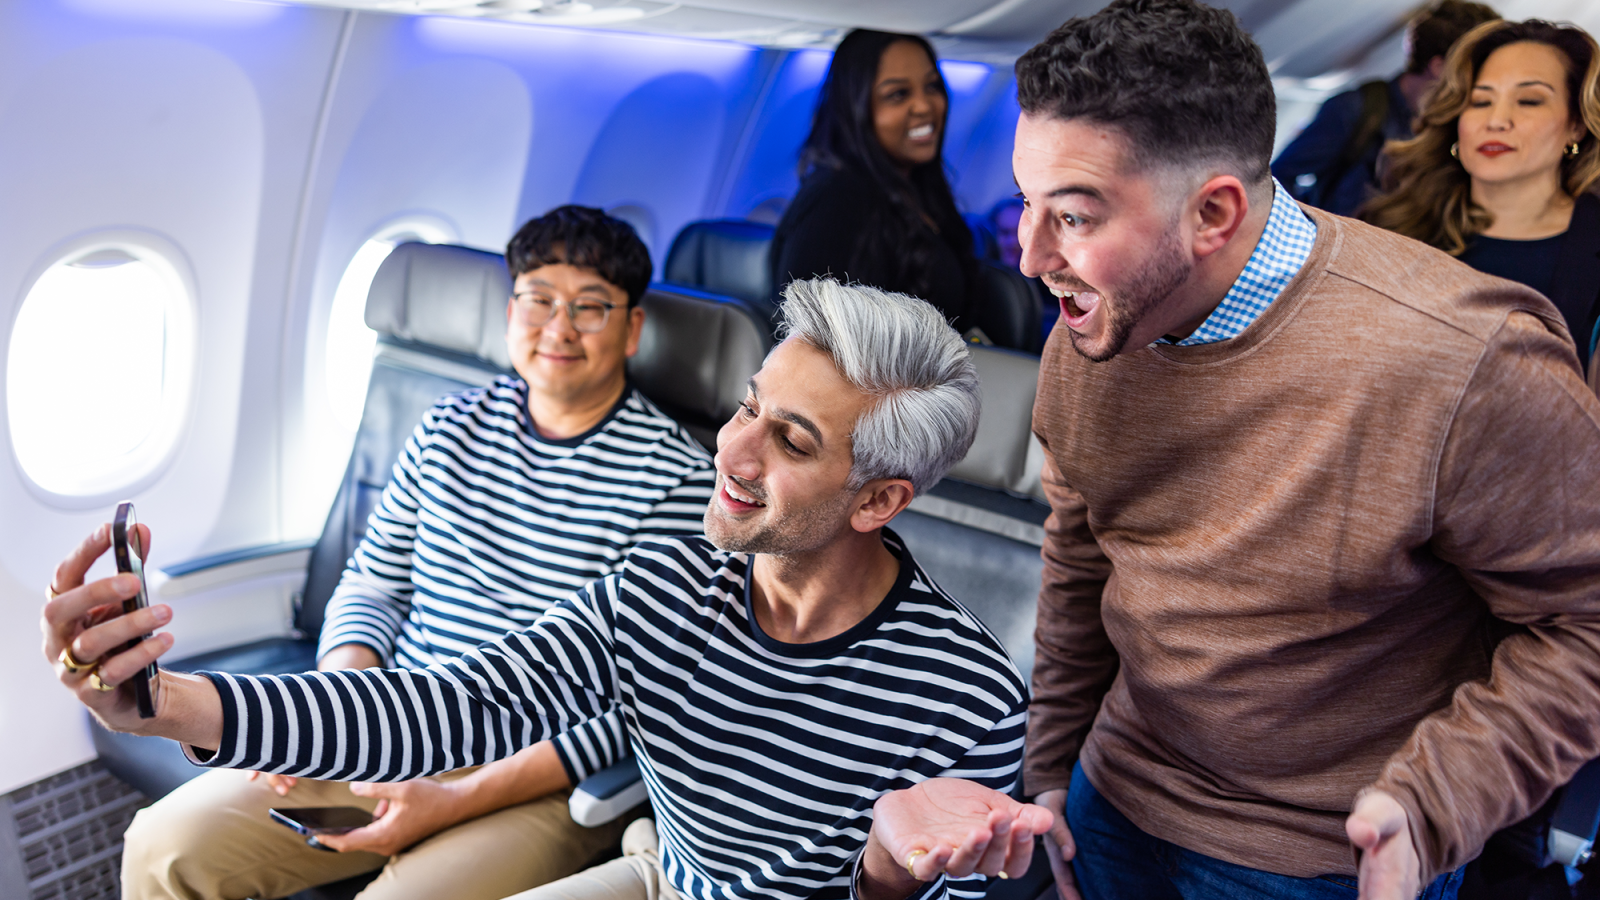 Catch a sneak peek before the Big Game of Alaska Airlines’ new commercials featuring Tan France, Nick Cho + employees [Video]